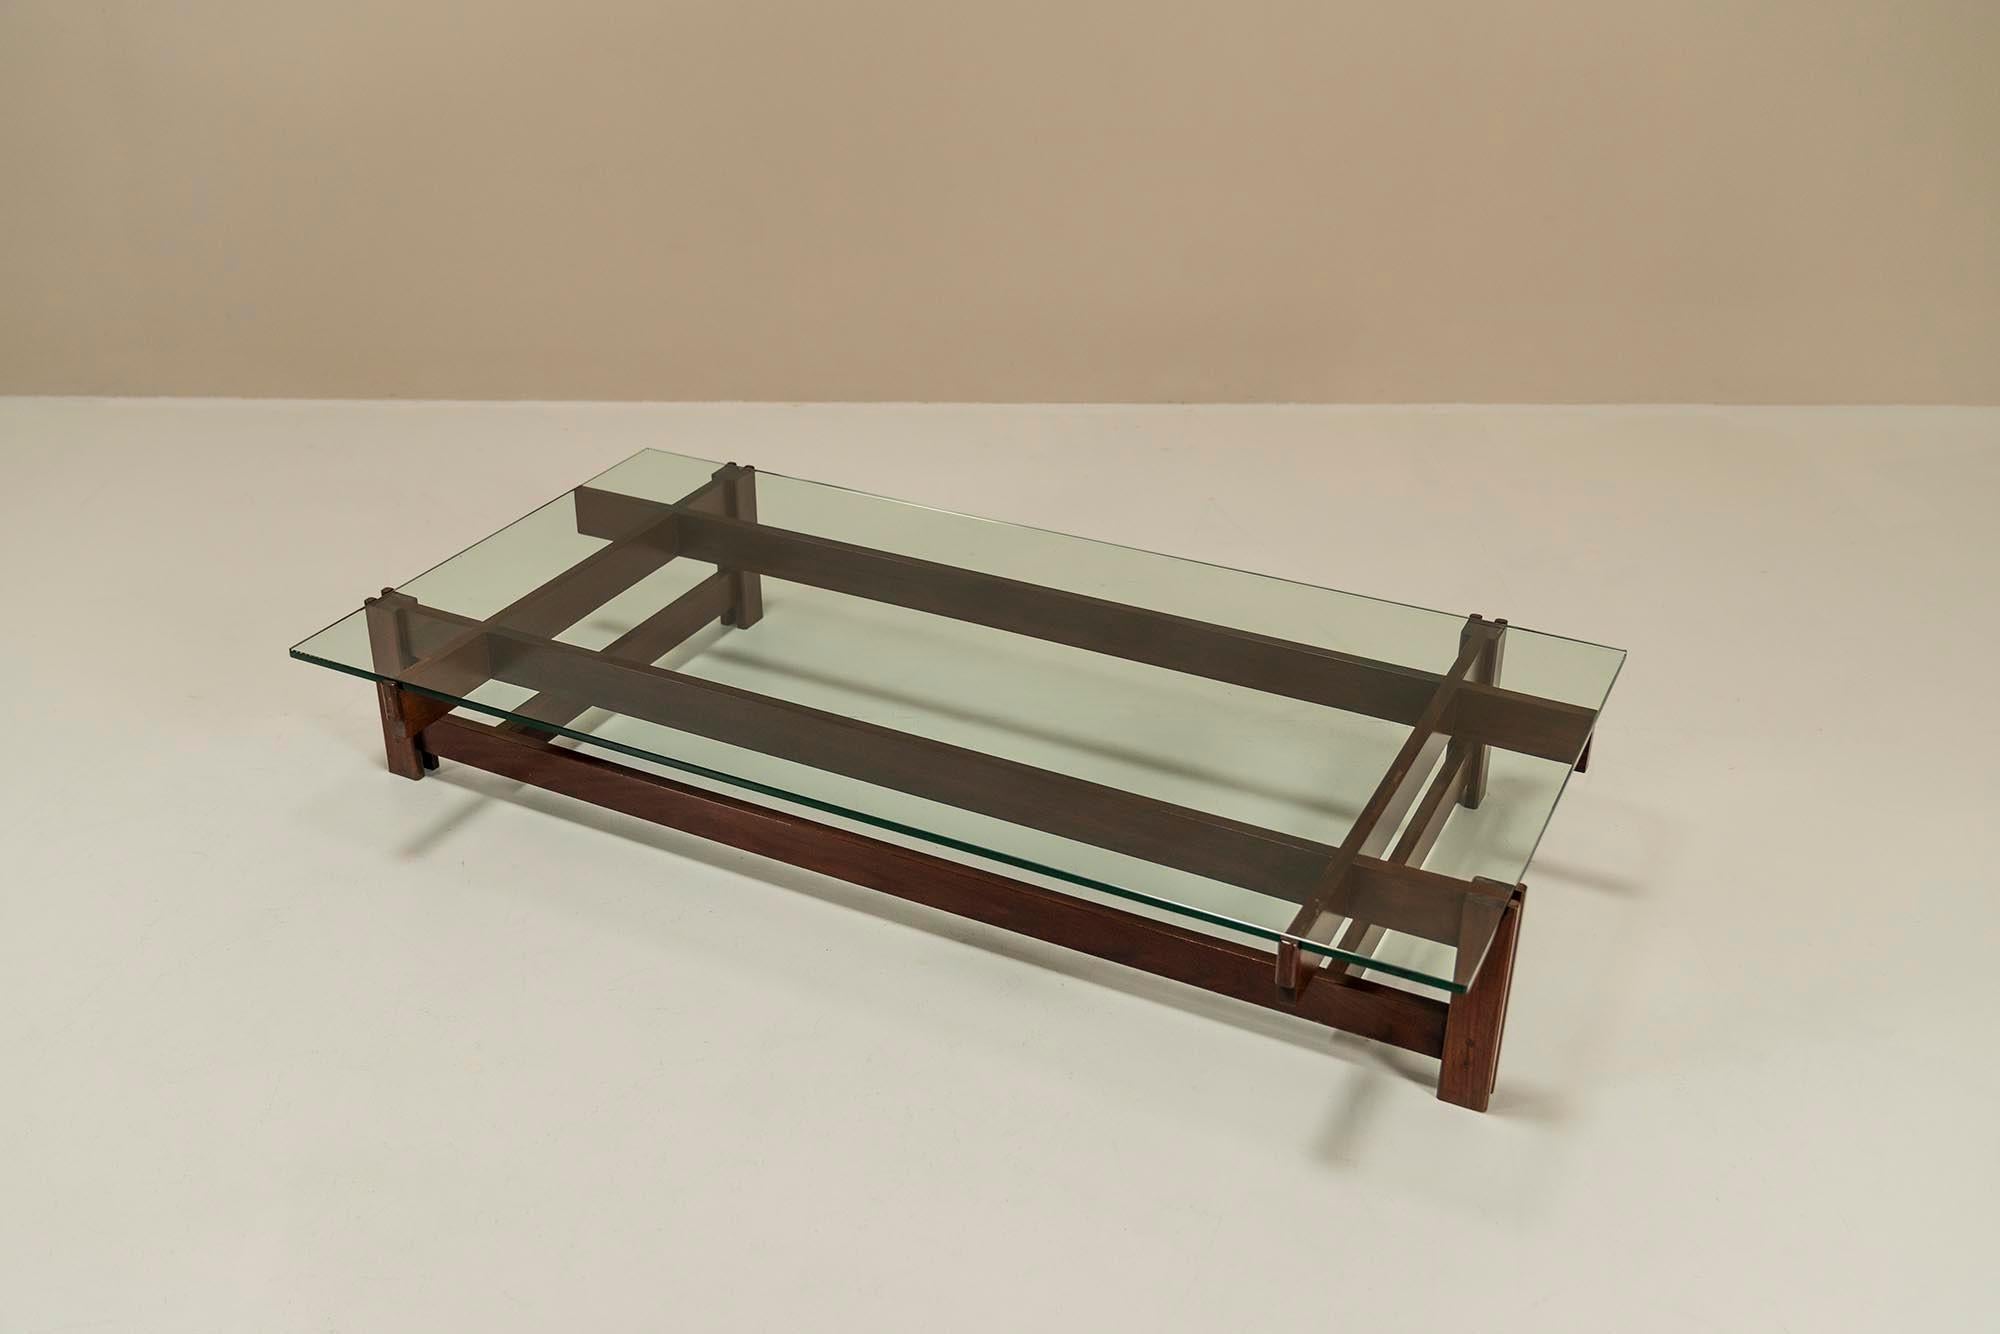 This beautiful timeless coffee table has an architectural character and can be used effortlessly in a variety of interior styles. It was designed in 1962 by the famous Italian architect Ico Parisi.The solid rosewood frame is ingeniously constructed